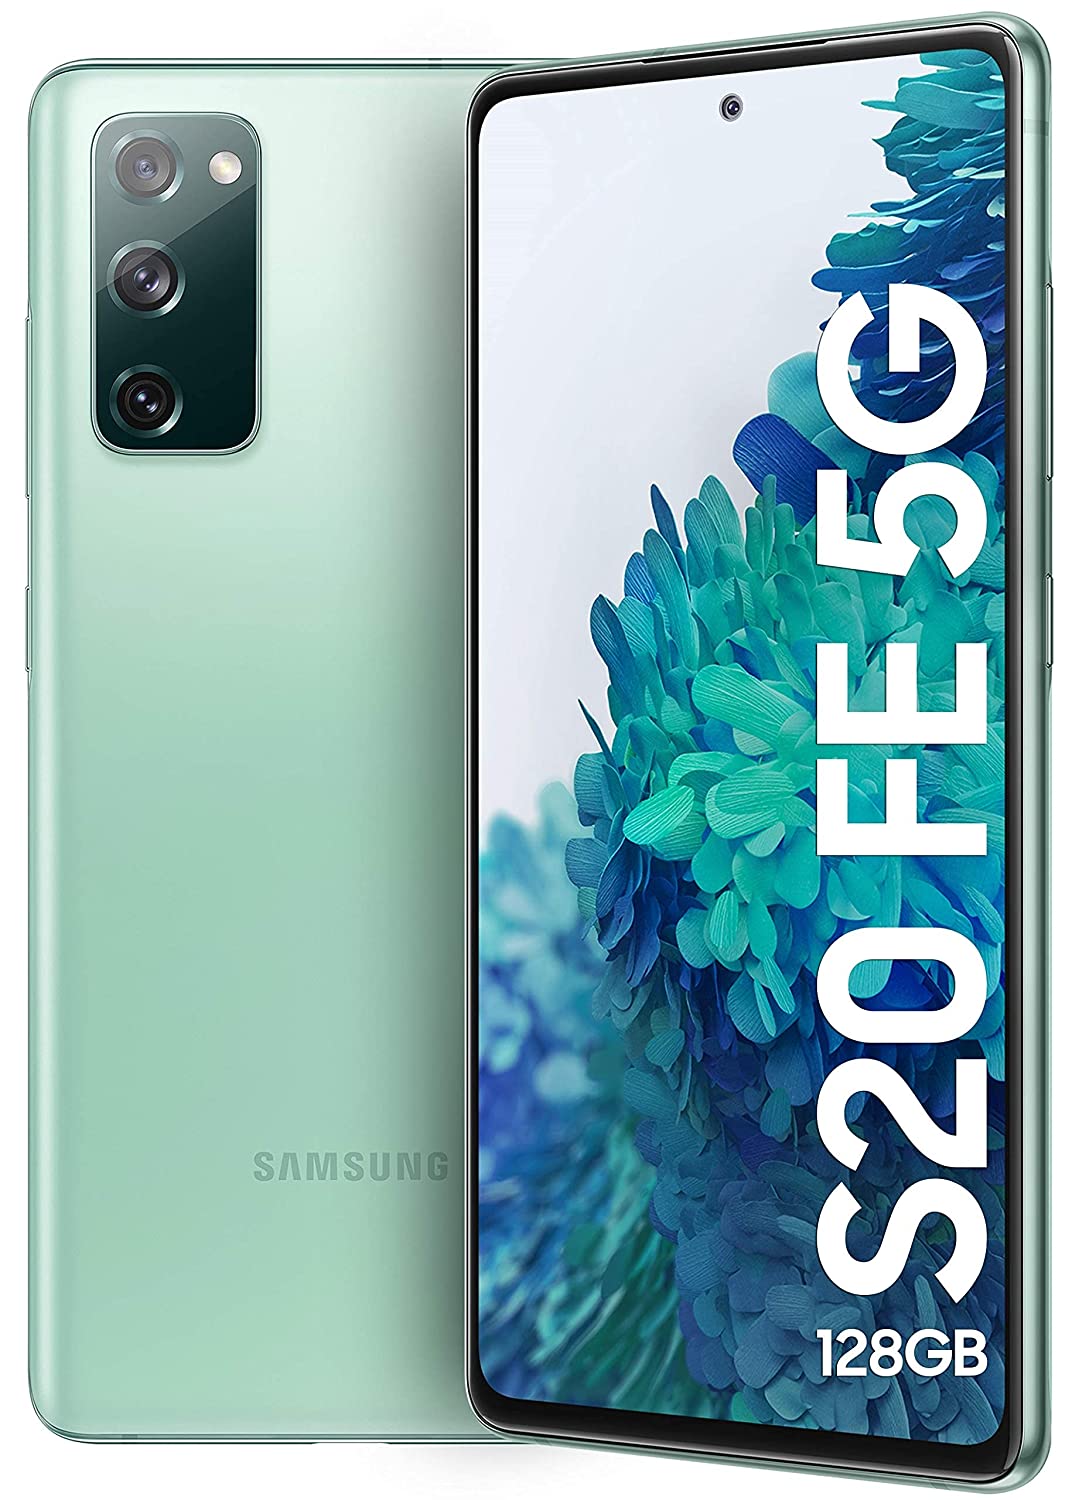 Samsung Galaxy S20 FE 5G SM-G781U Cloud Mint - New Case, Screen Protector & Shipping (As New)